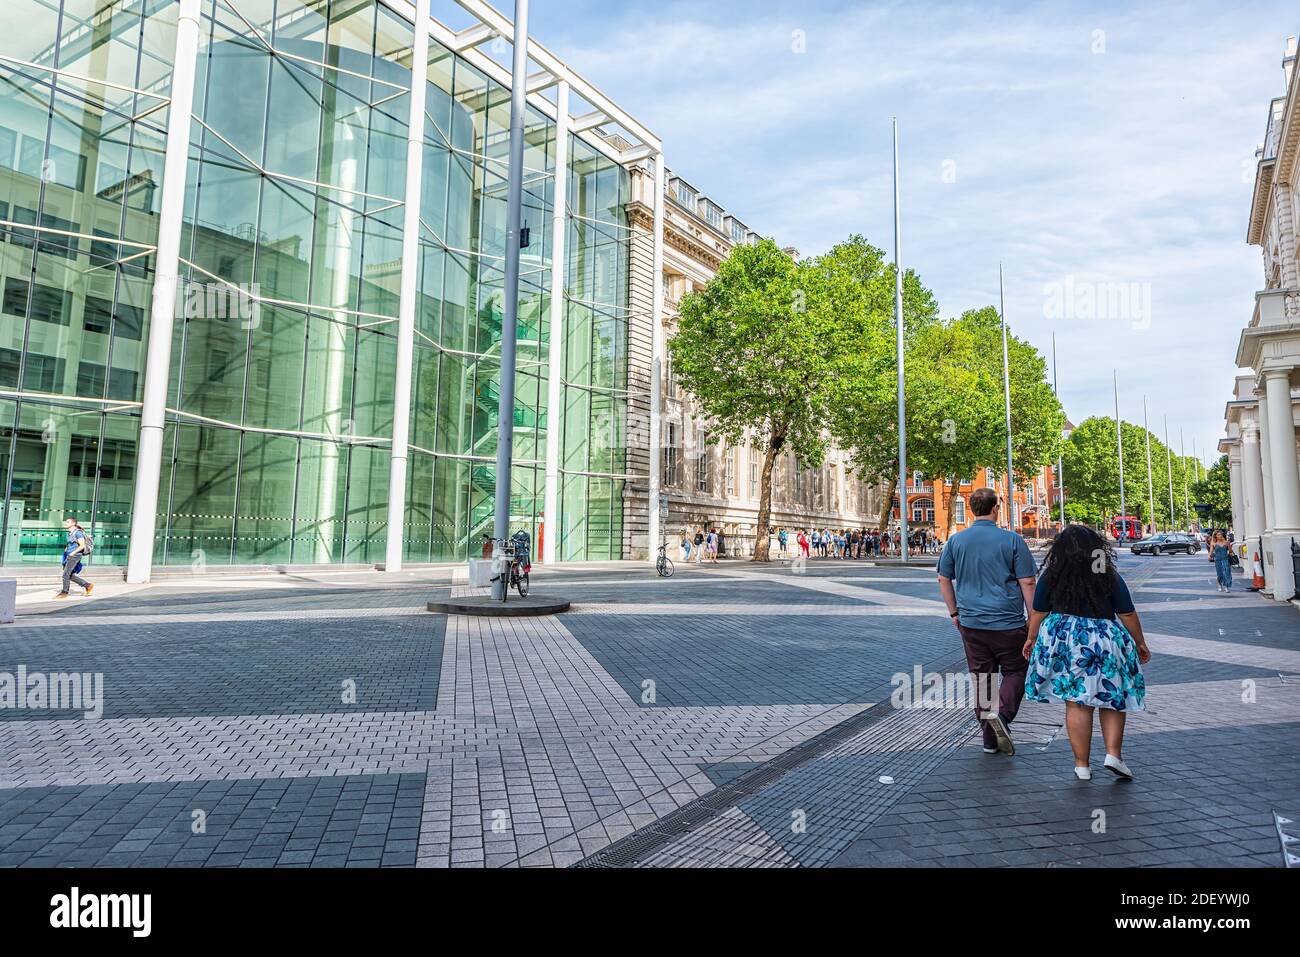 London, UK - June 24, 2018: Imperial College Business school main entrance building with people walking at Exhibition road sidewalk in Chelsea and Ken Stock Photo